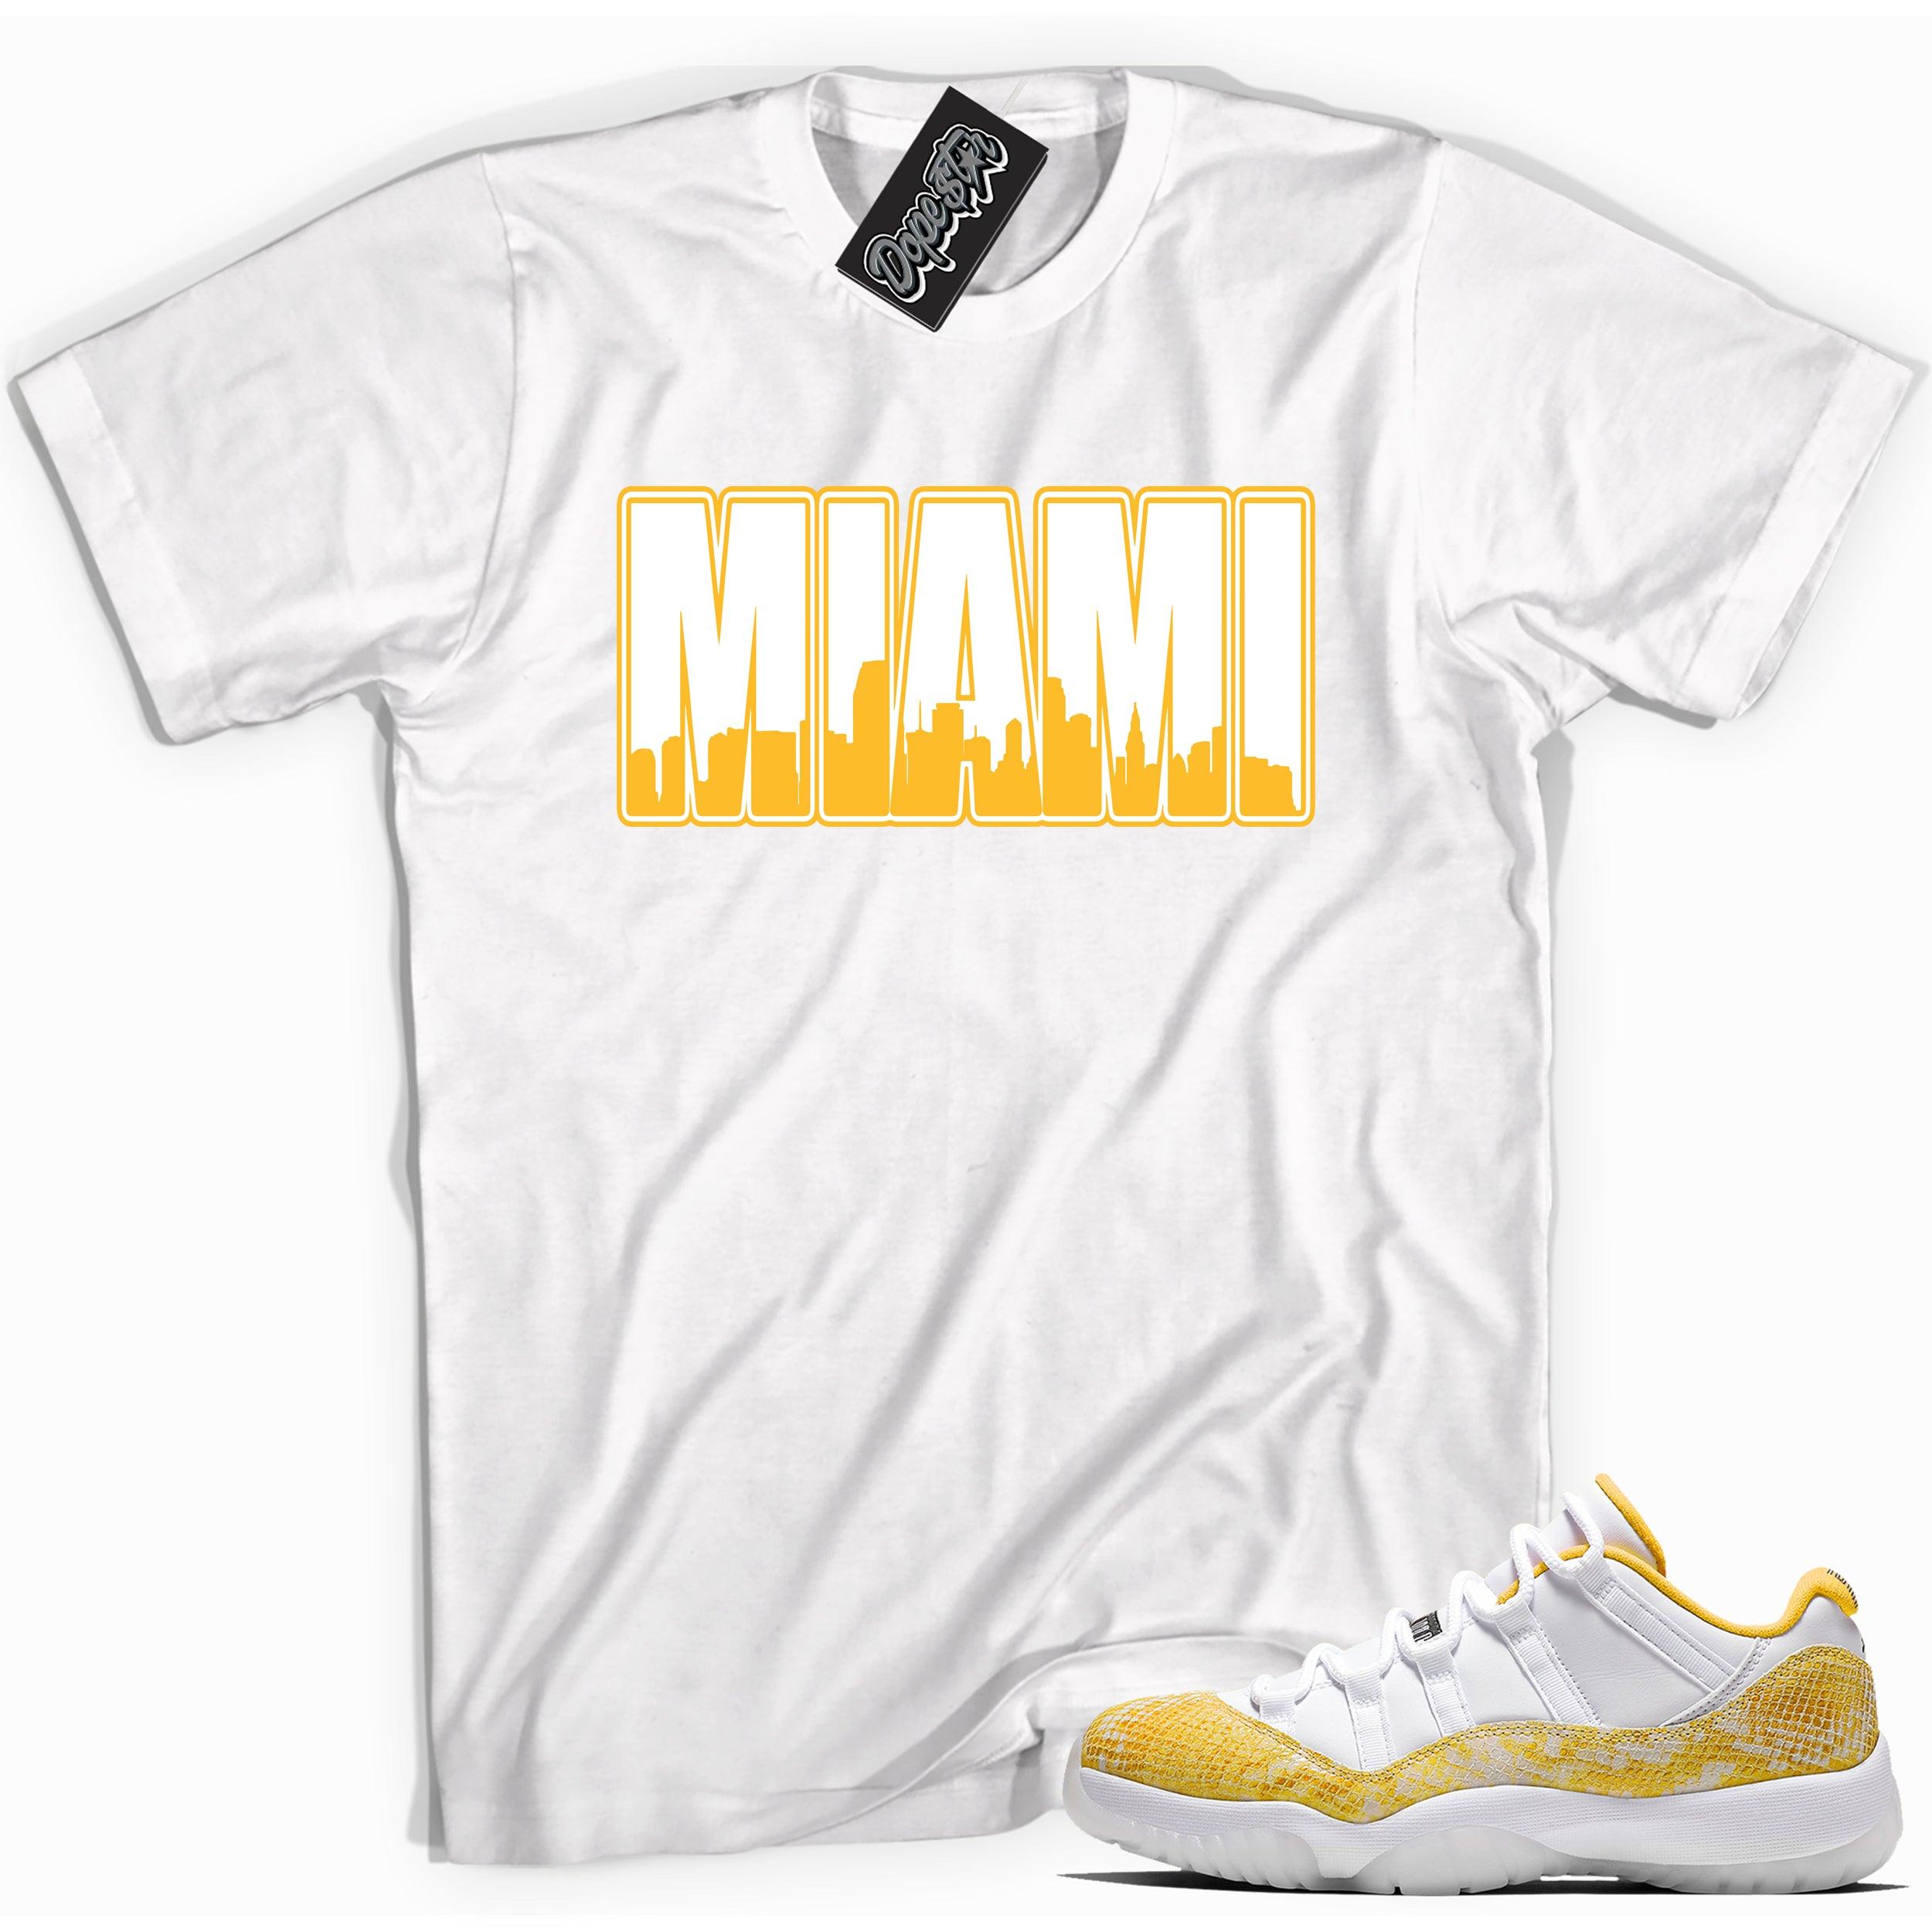 Cool white graphic tee with 'miami' print, that perfectly matches Air Jordan 11 Low Yellow Snakeskin sneakers